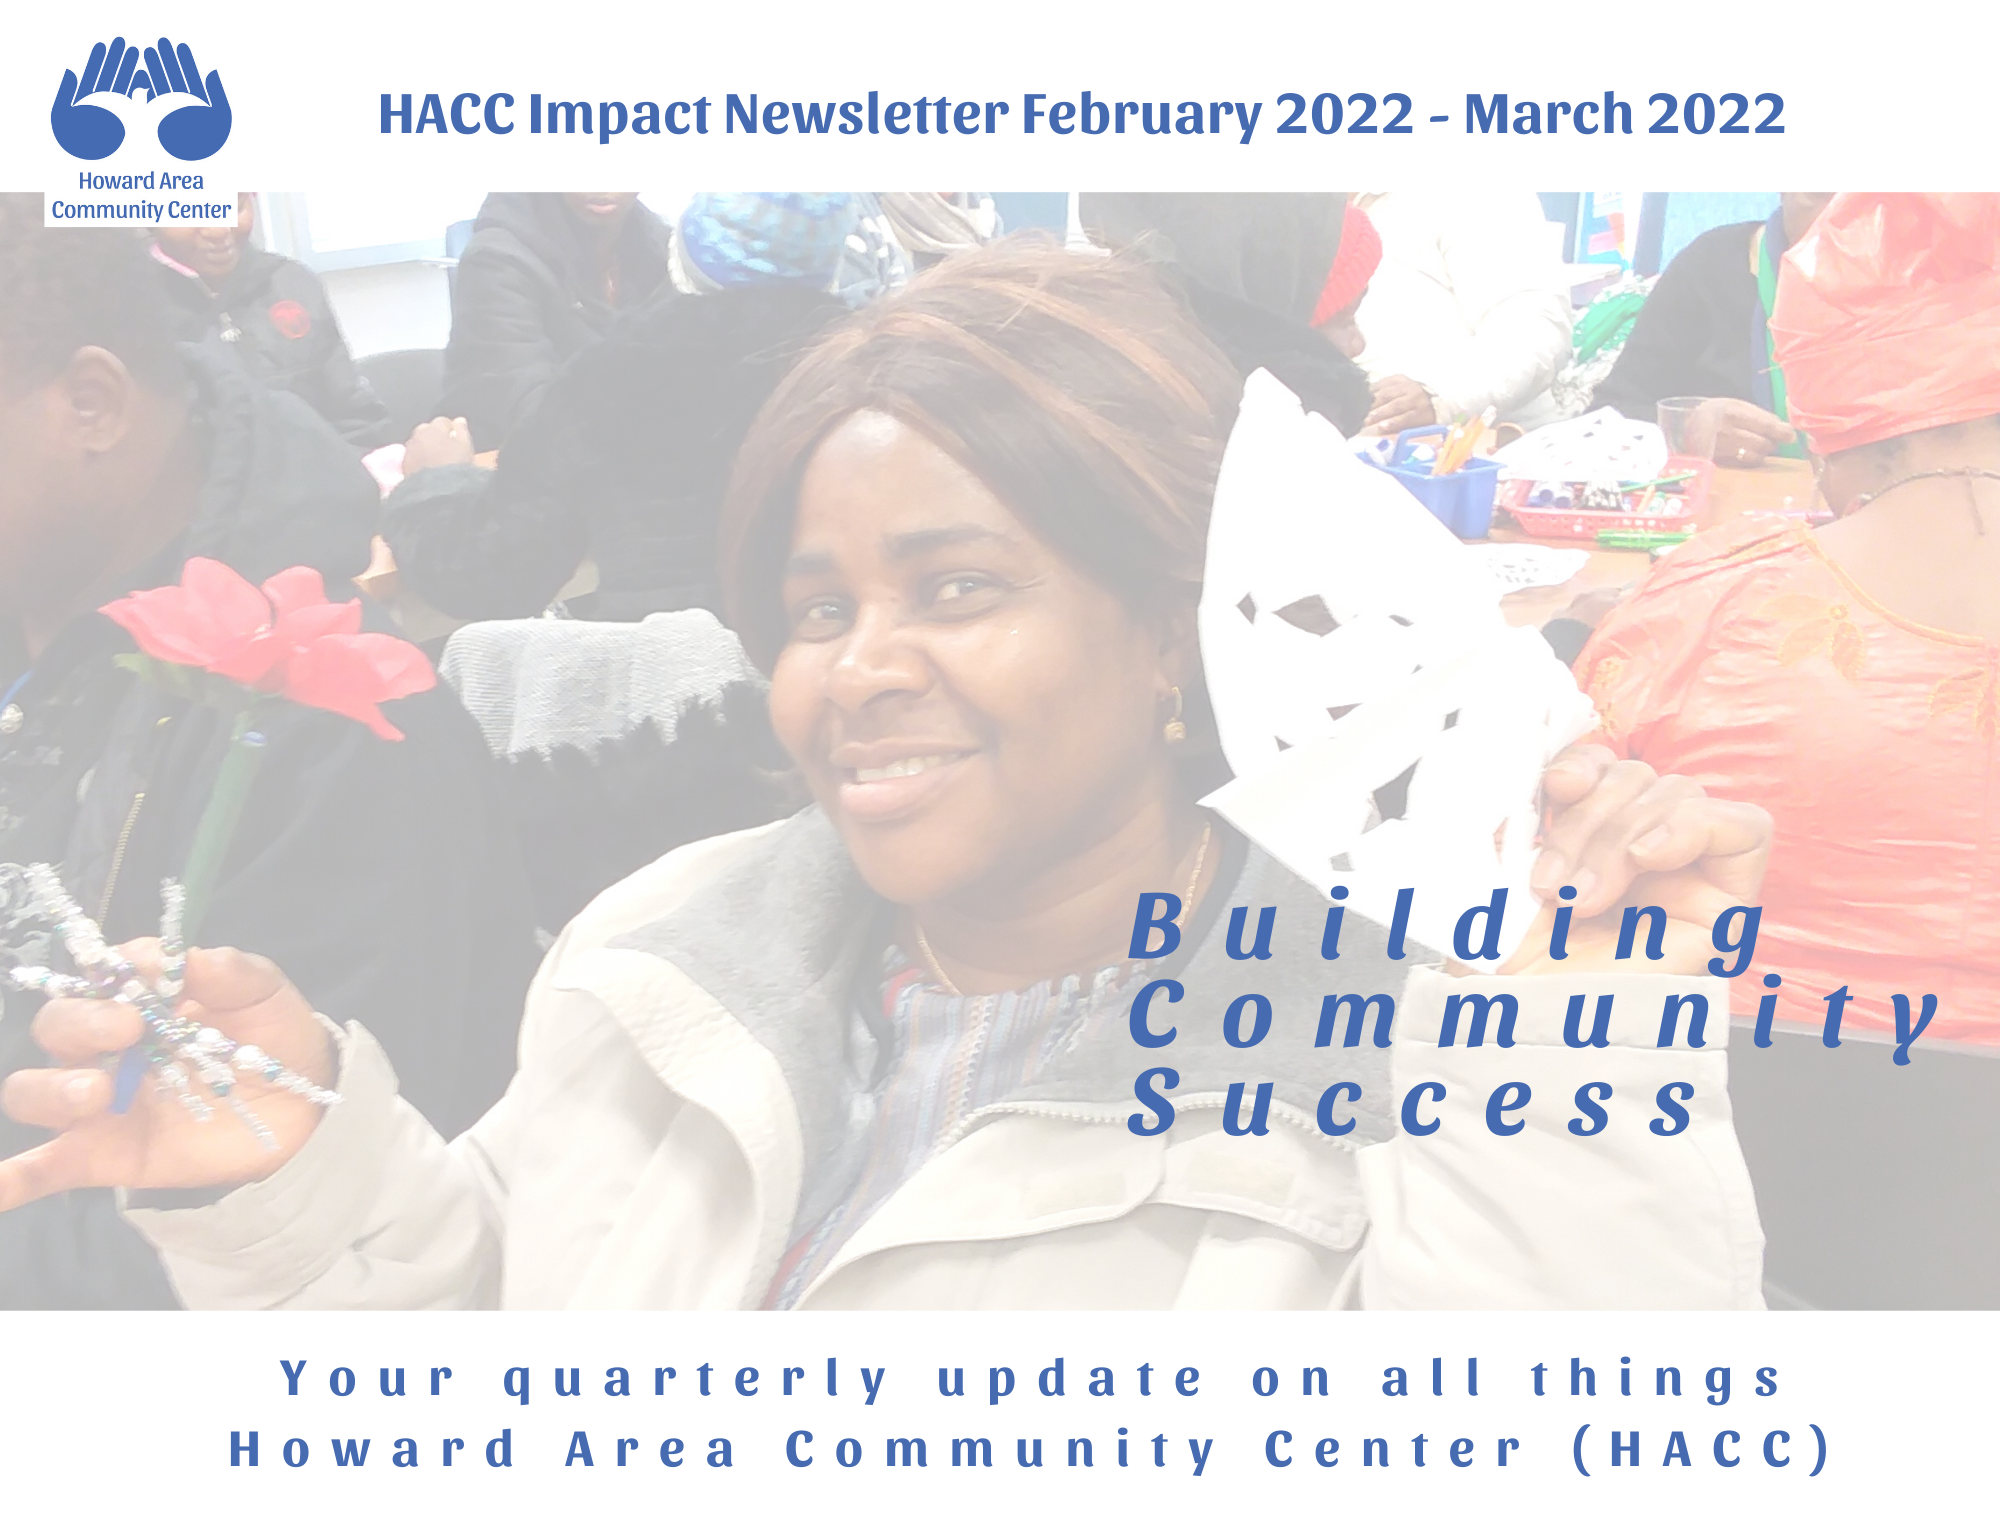 HECC Impact Newsletter February 2022-March 2022